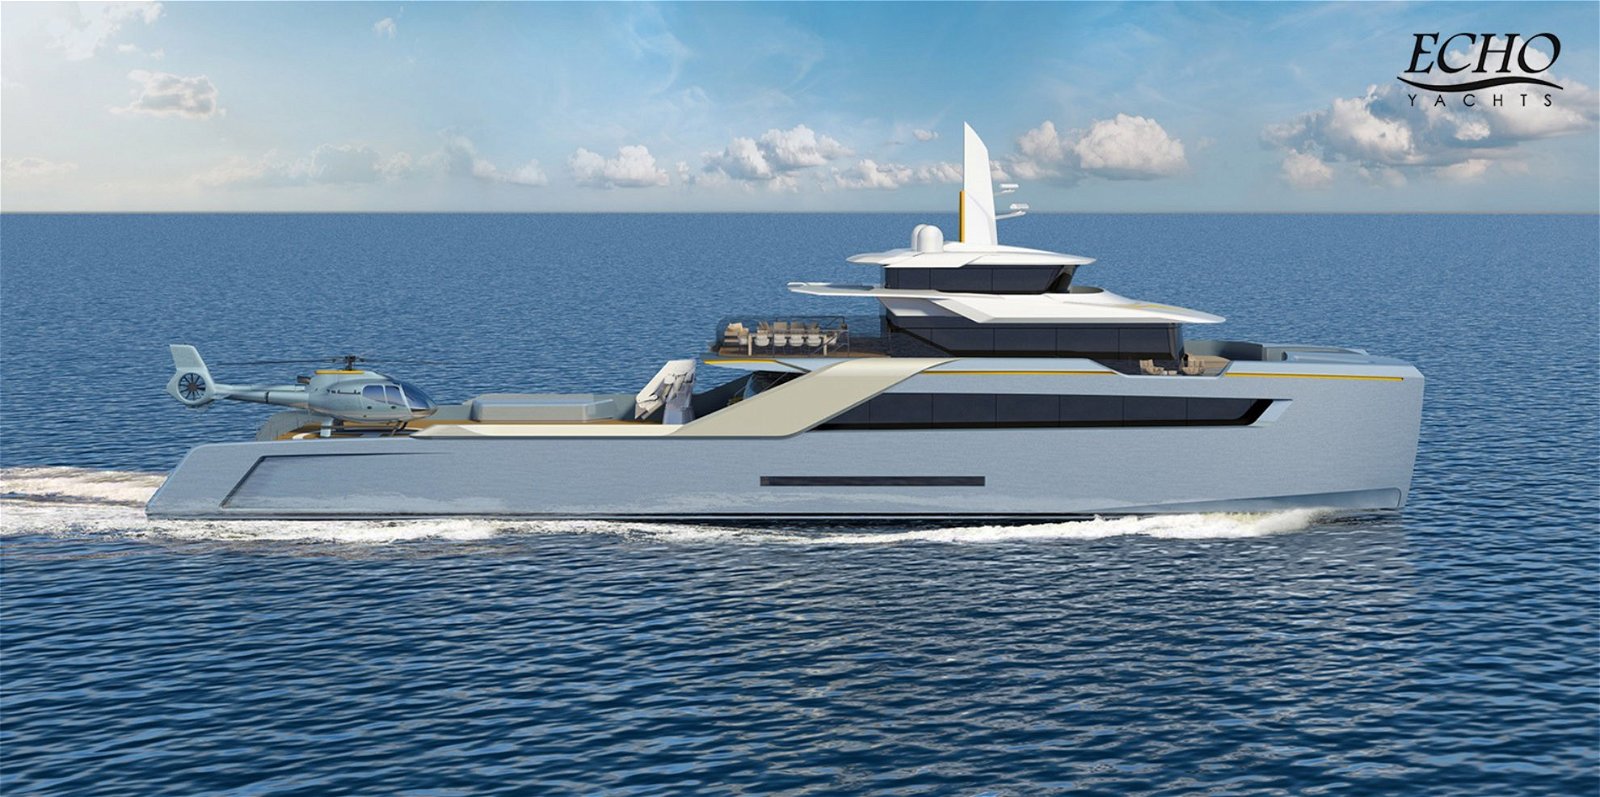 1 - Project Echo by Echo Yachts